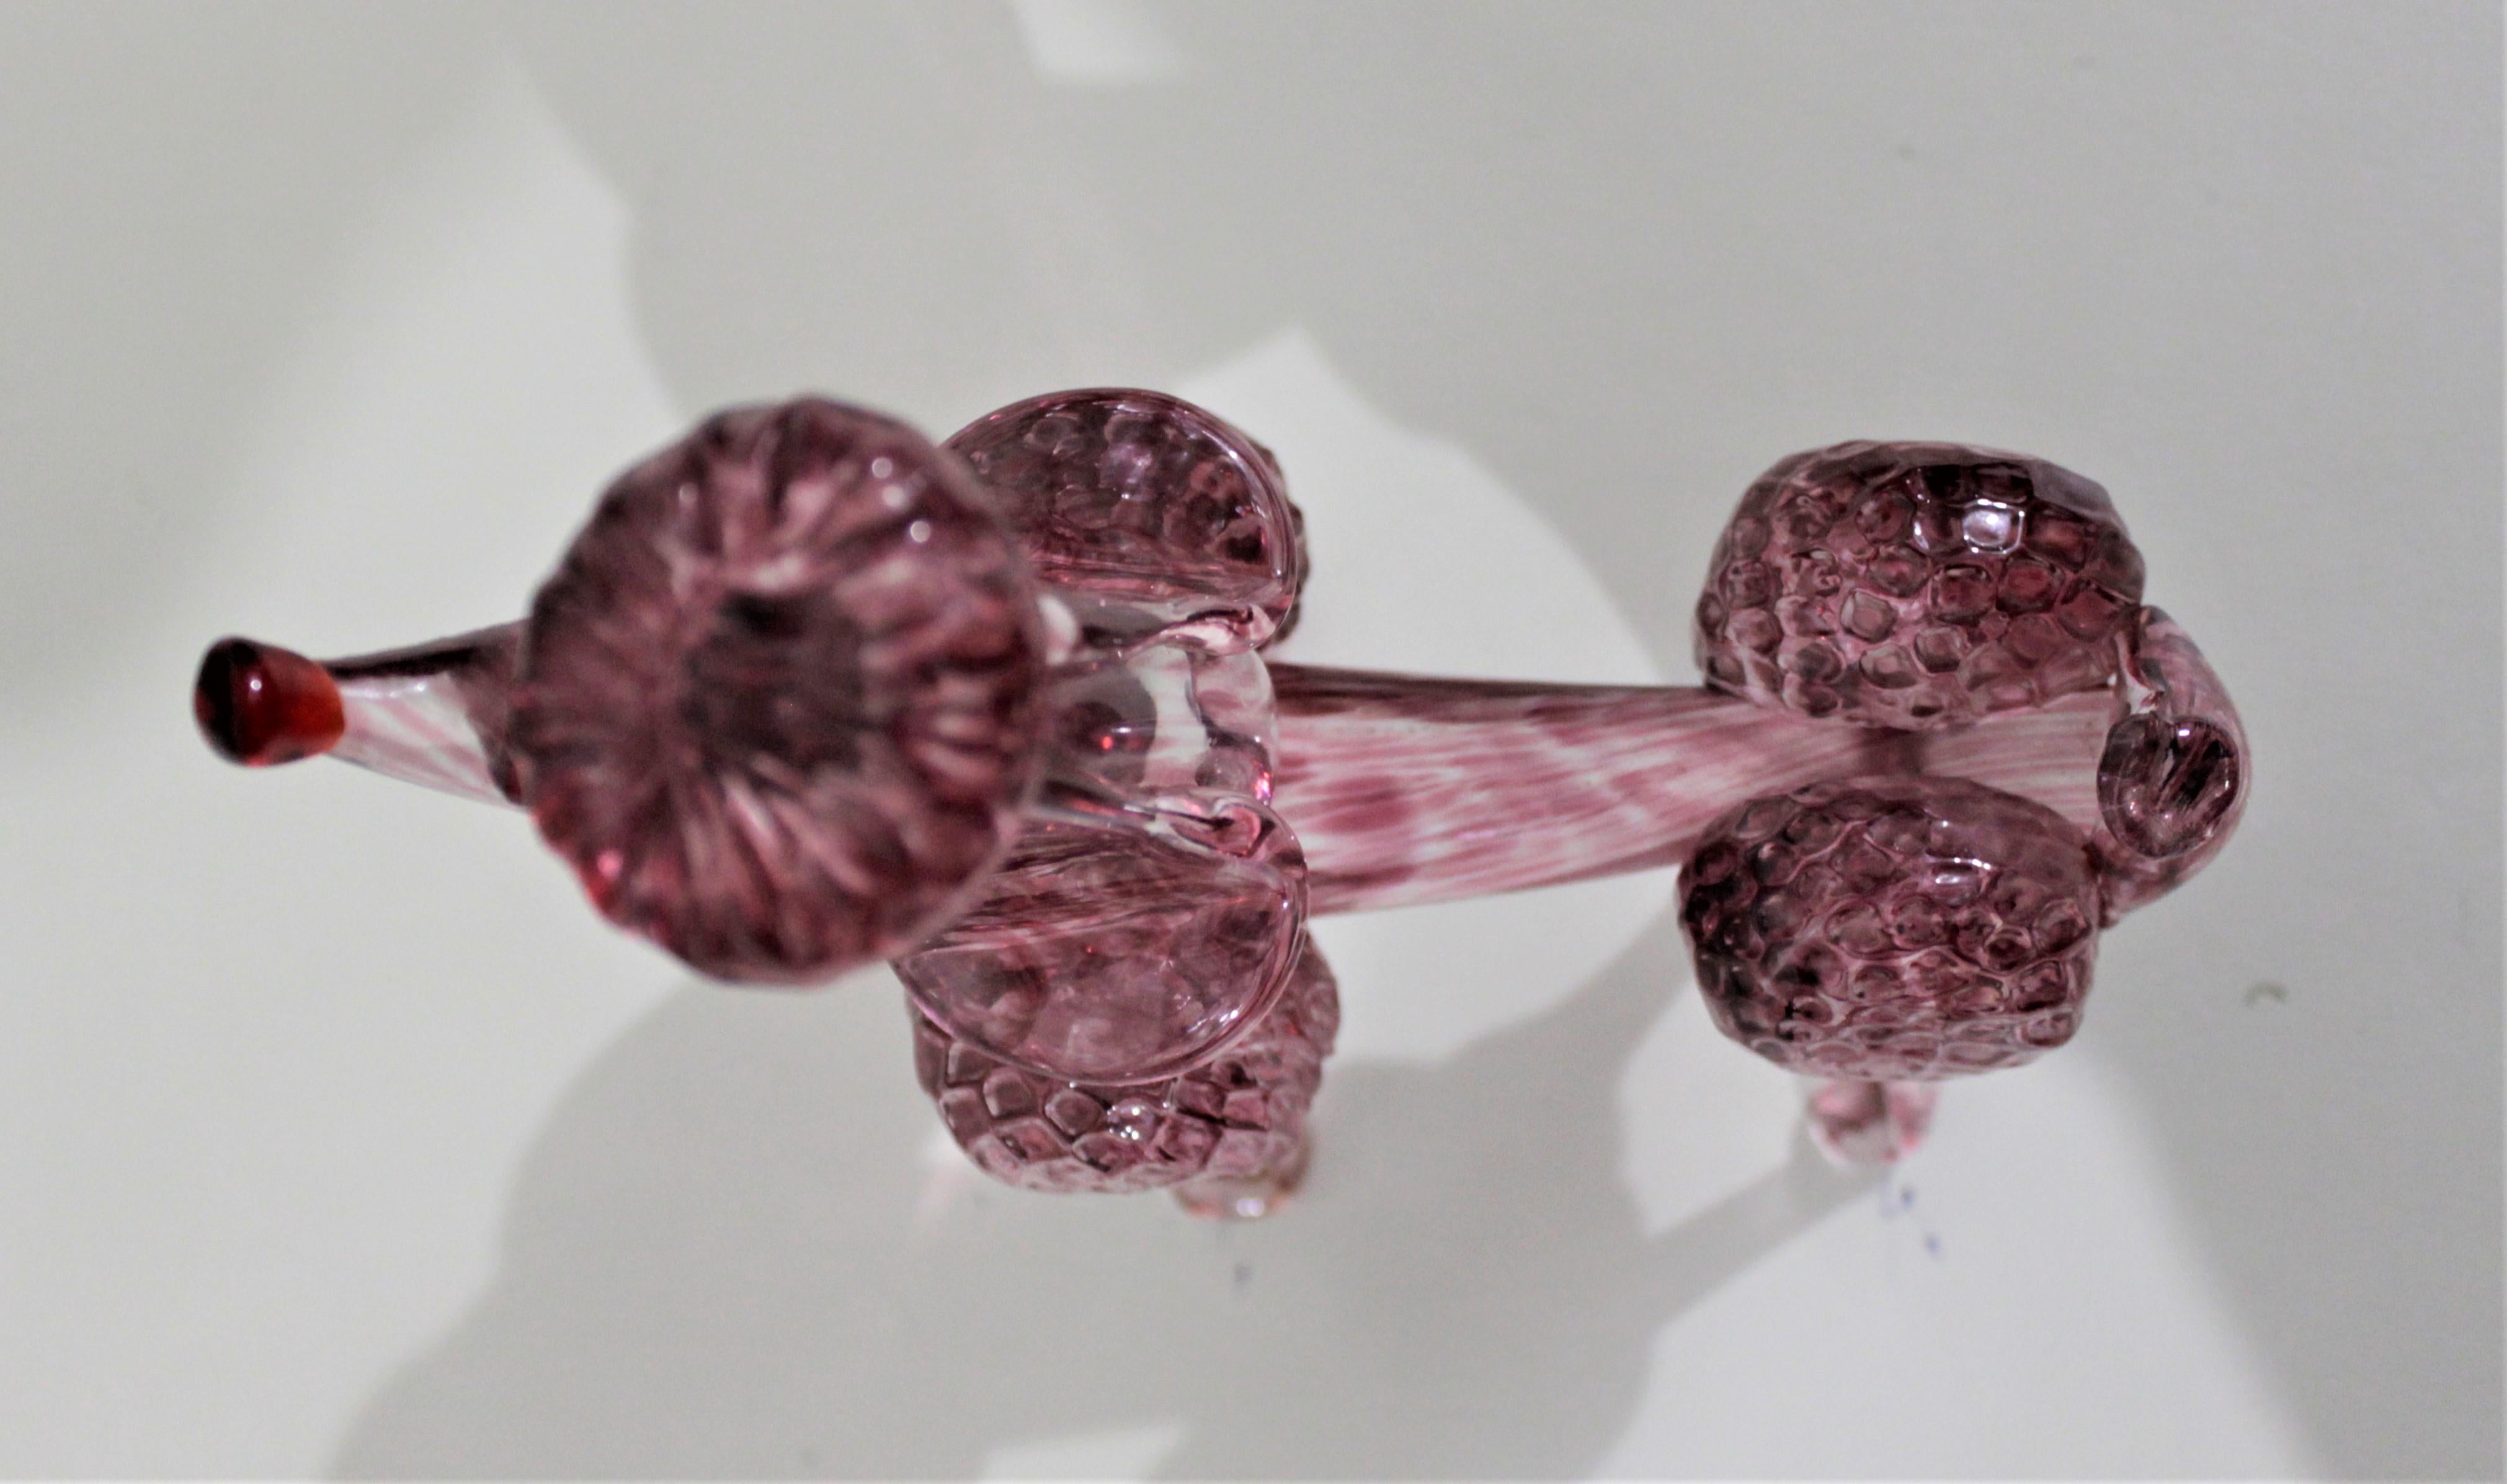 Hand-Crafted Mid-Century Modern Cranberry or Pink Art Glass Poodle Dog Figurine